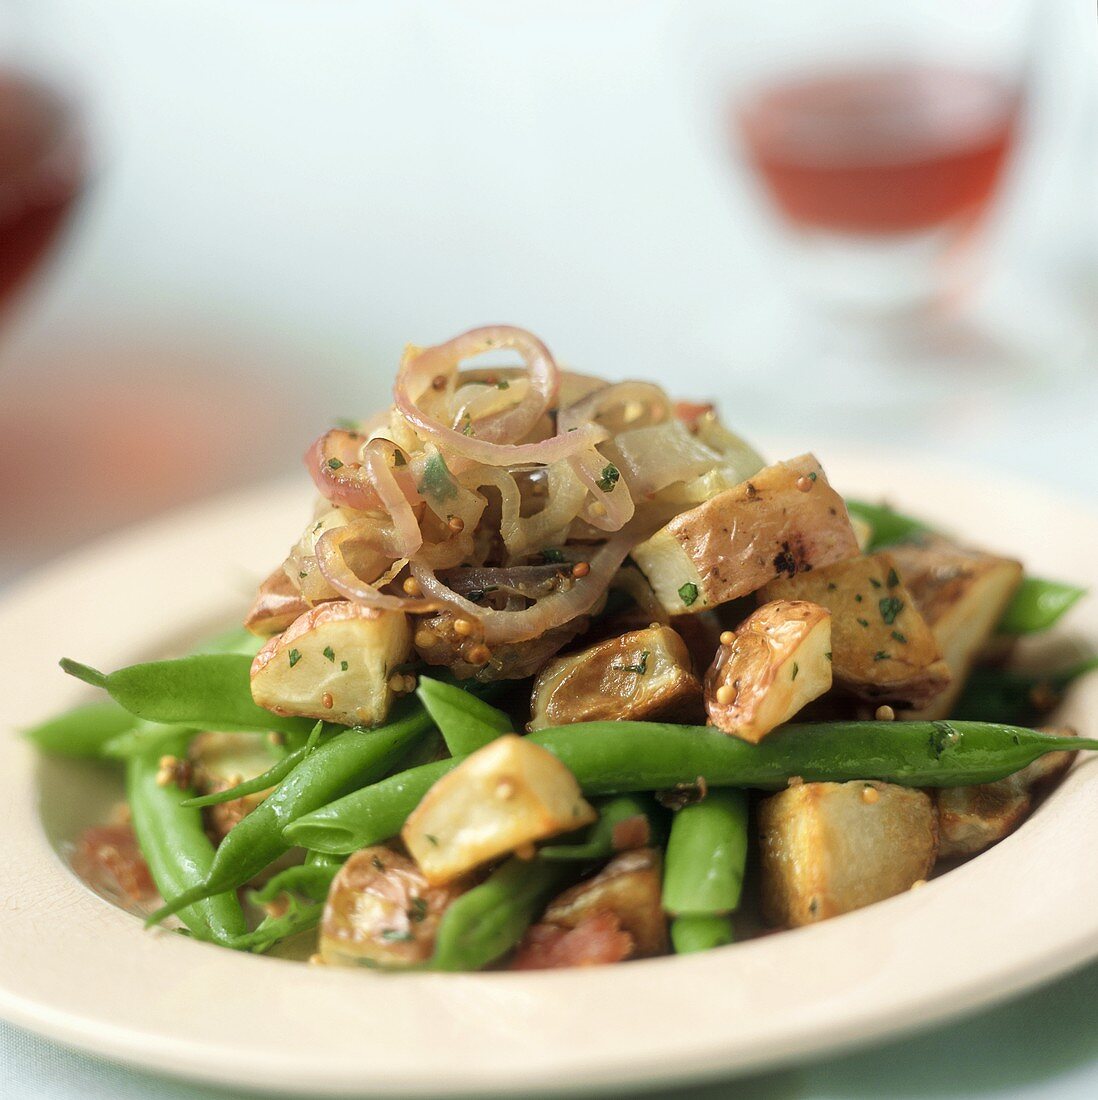 Fried potatoes with green beans and onions